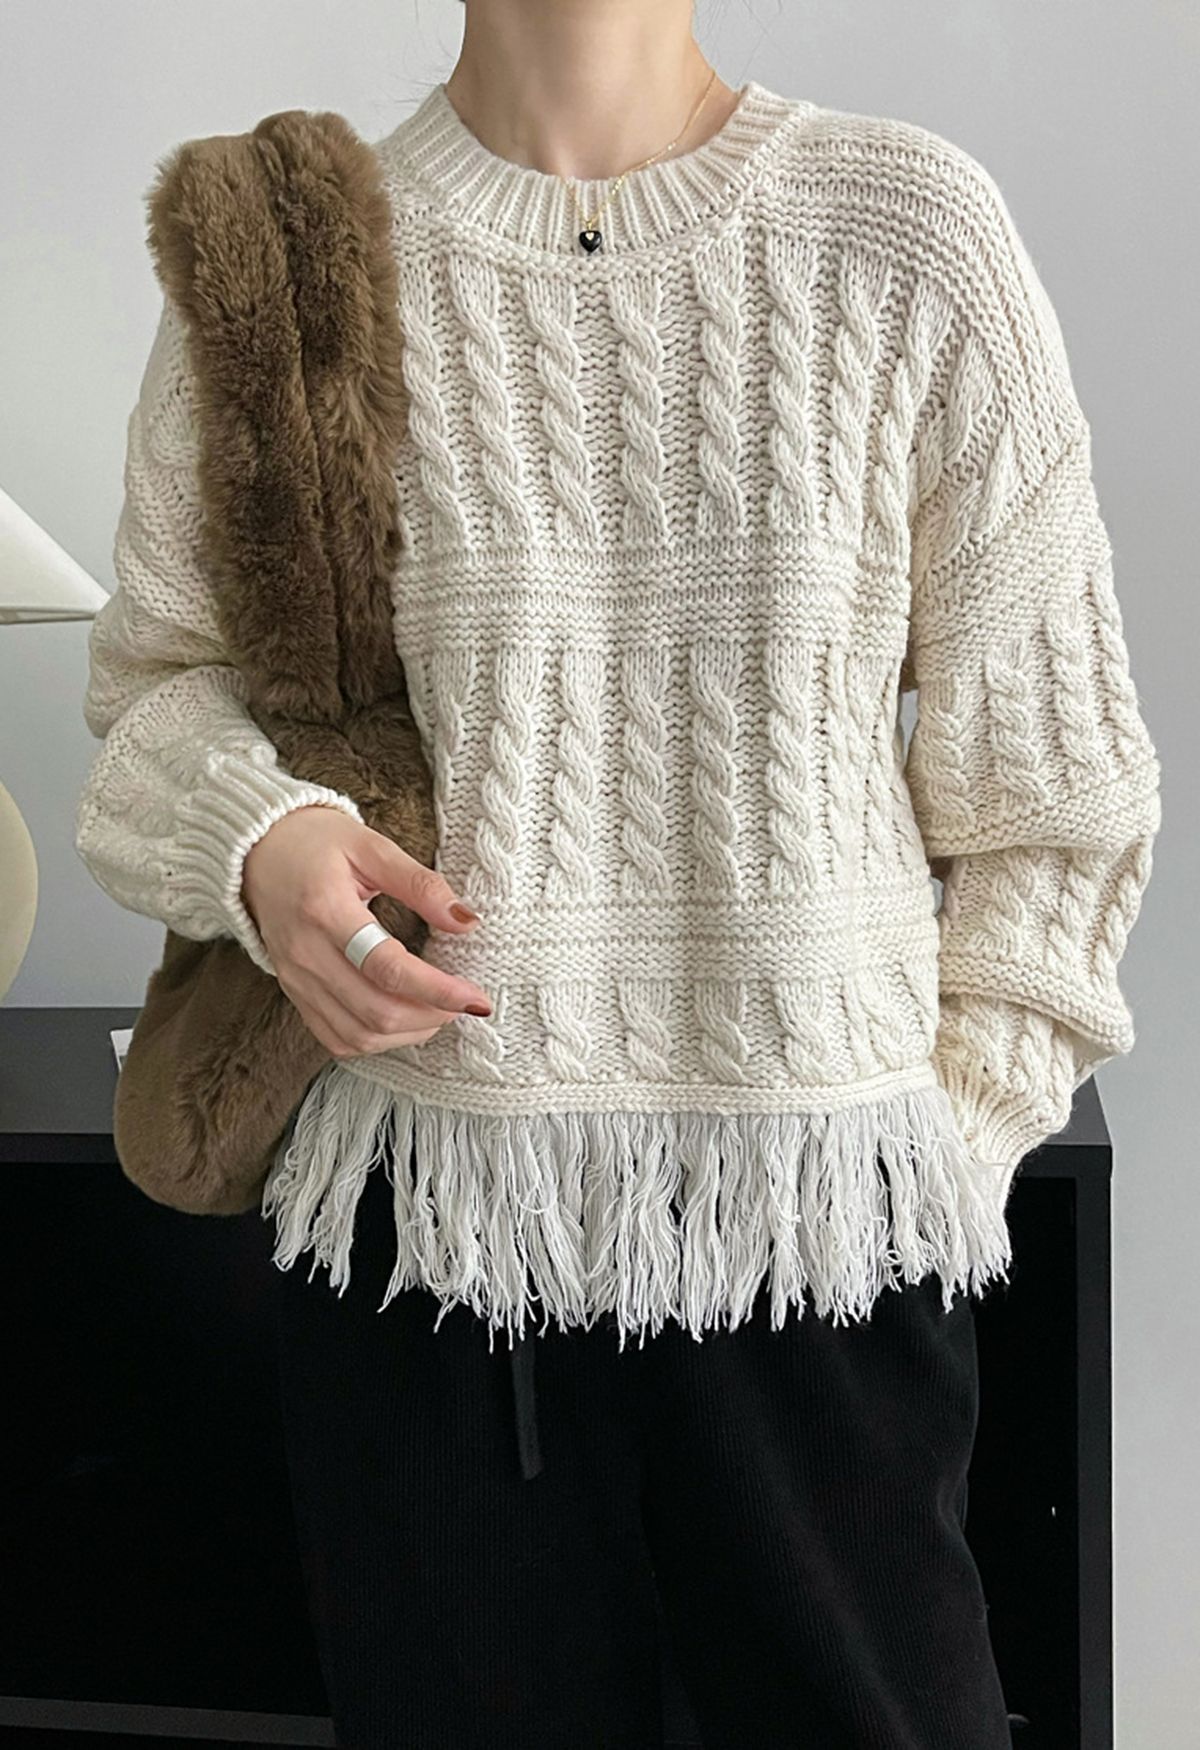 Fringed Hem Braided Knit Sweater in Ivory - Retro, Indie and Unique Fashion